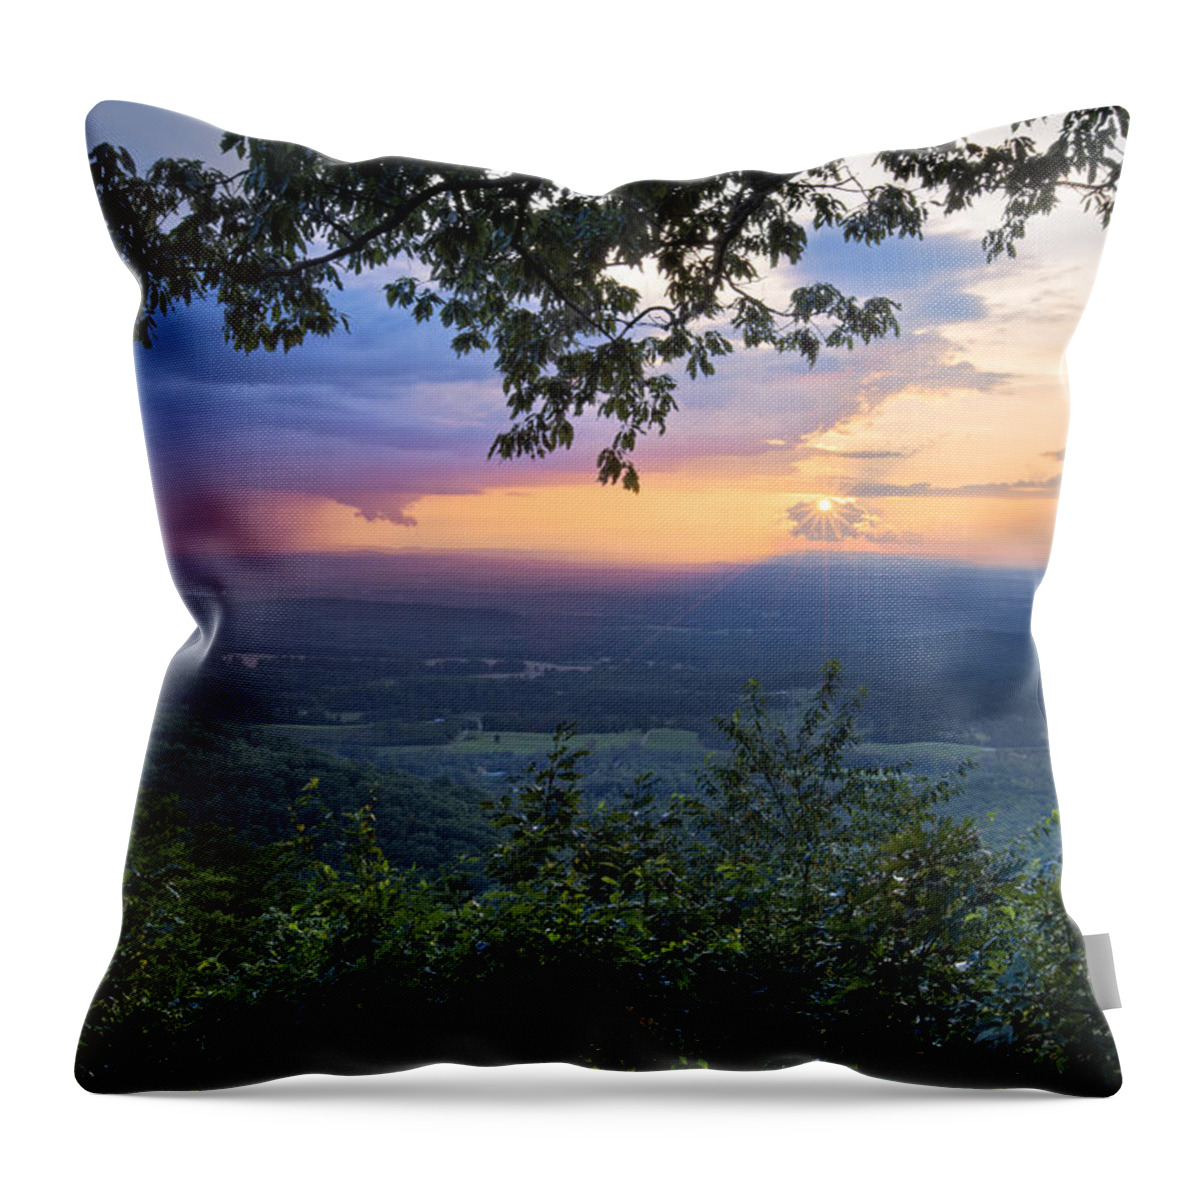 Appalachia Throw Pillow featuring the photograph Appalachian Mountains #2 by Debra and Dave Vanderlaan